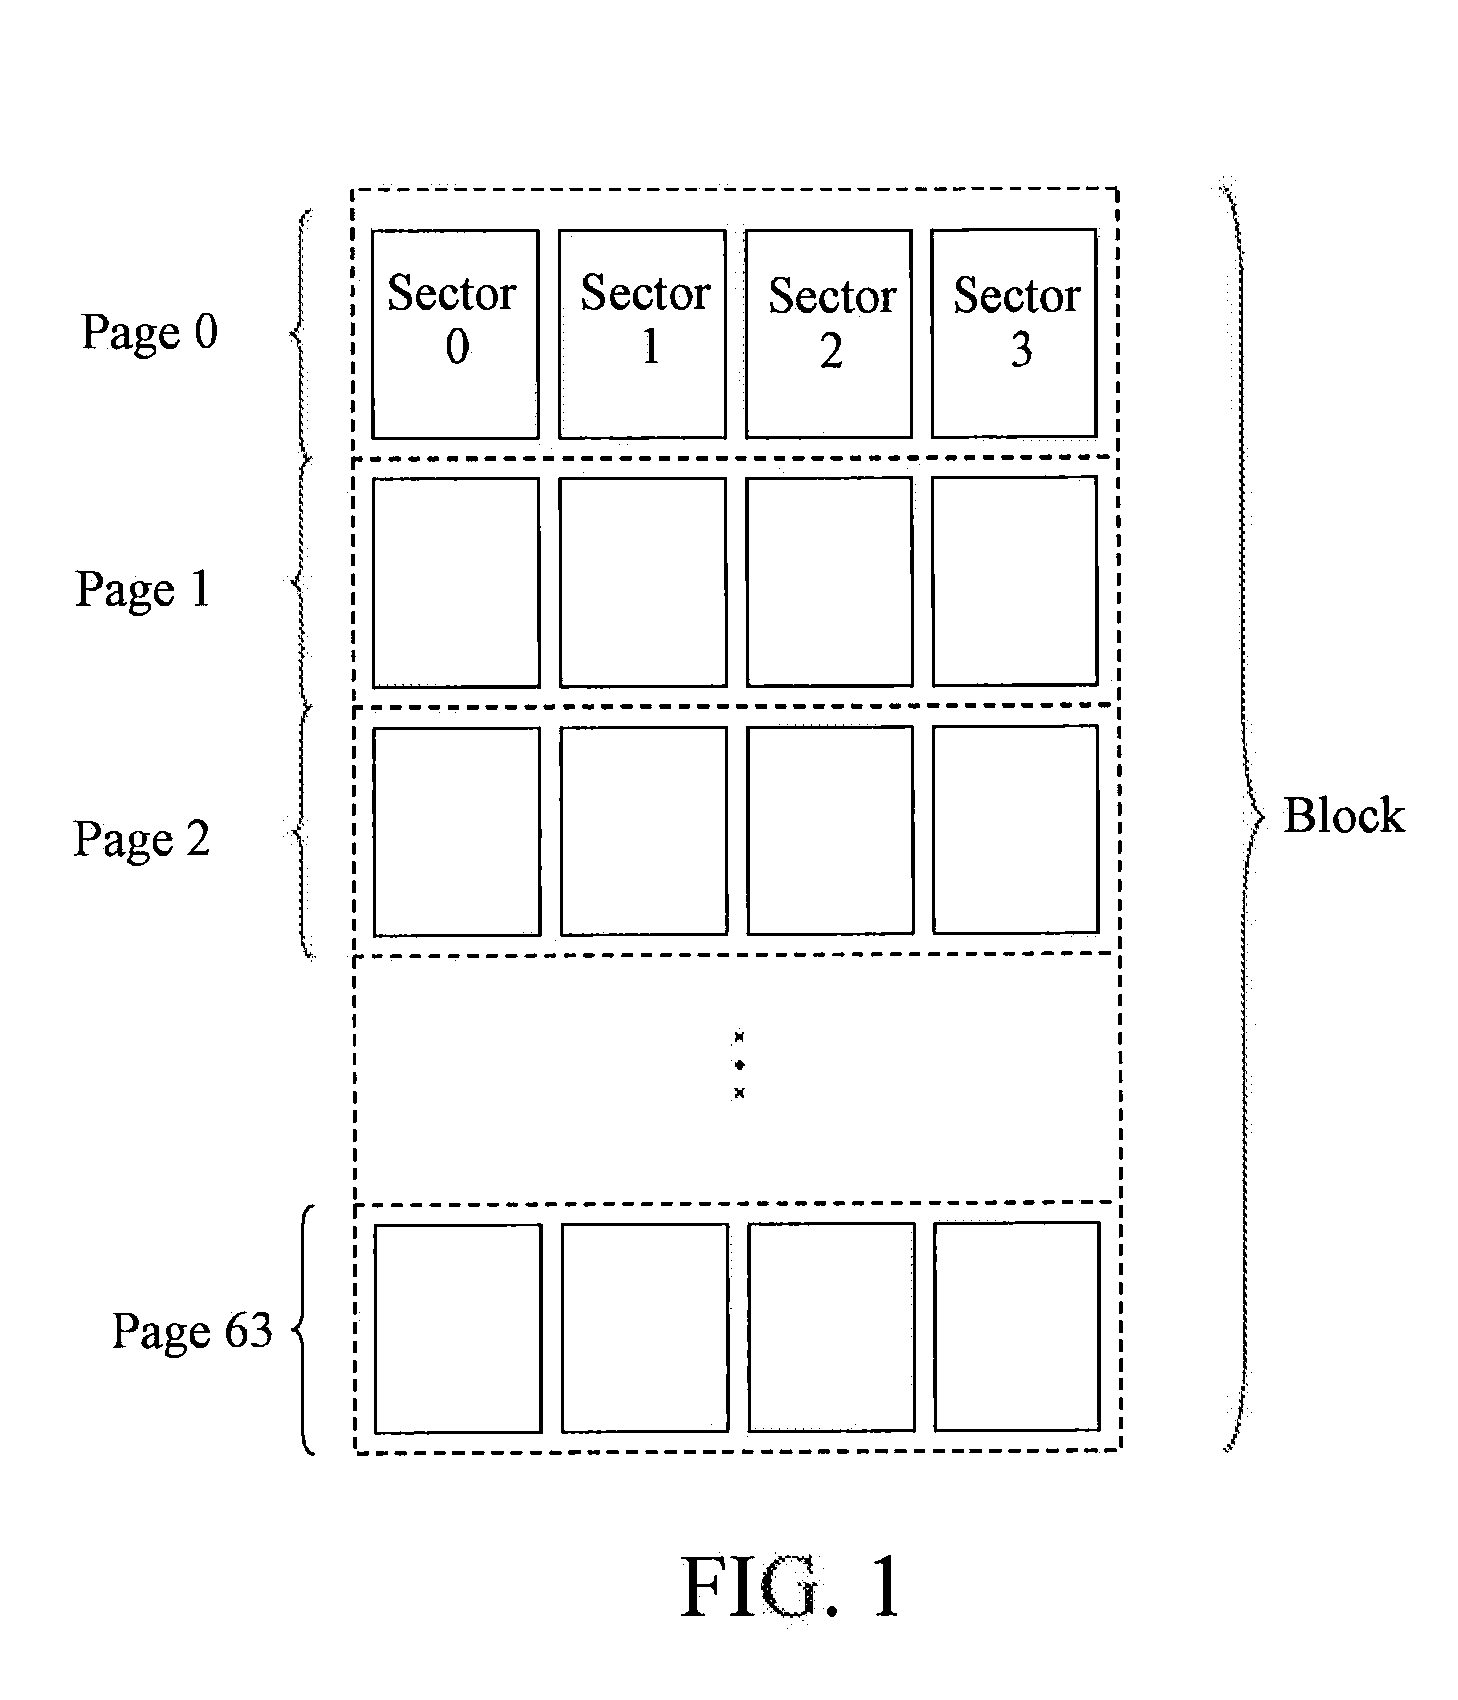 Self-adaptive control method for logical strips based on multi-channel solid-state non-volatile storage device